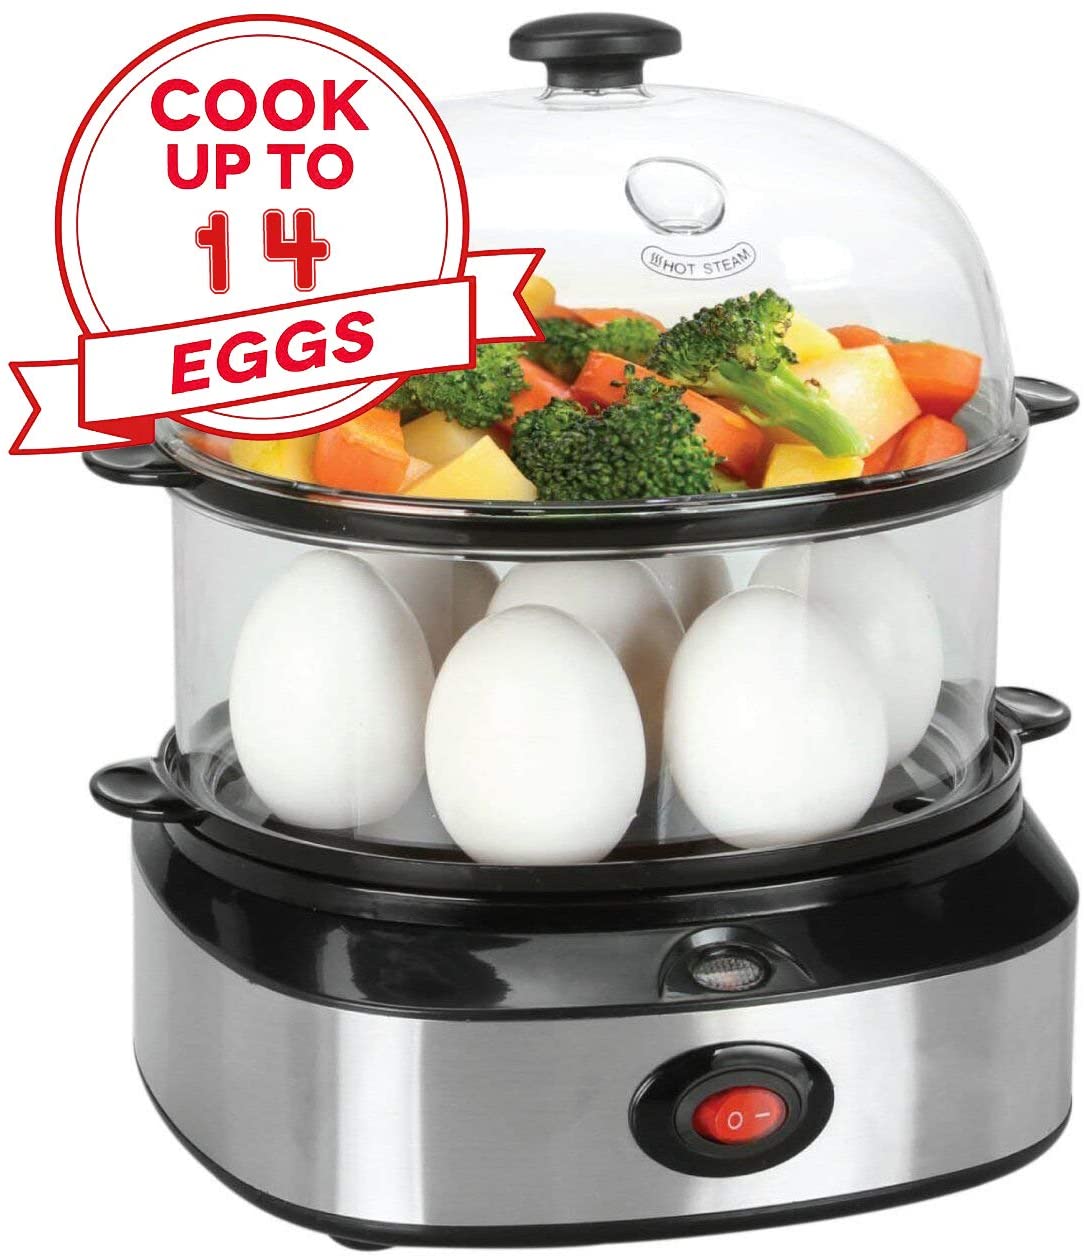 Rapid egg cooker, electric egg cooker for poached, poached, scrambled or  fried eggs with automatic shut